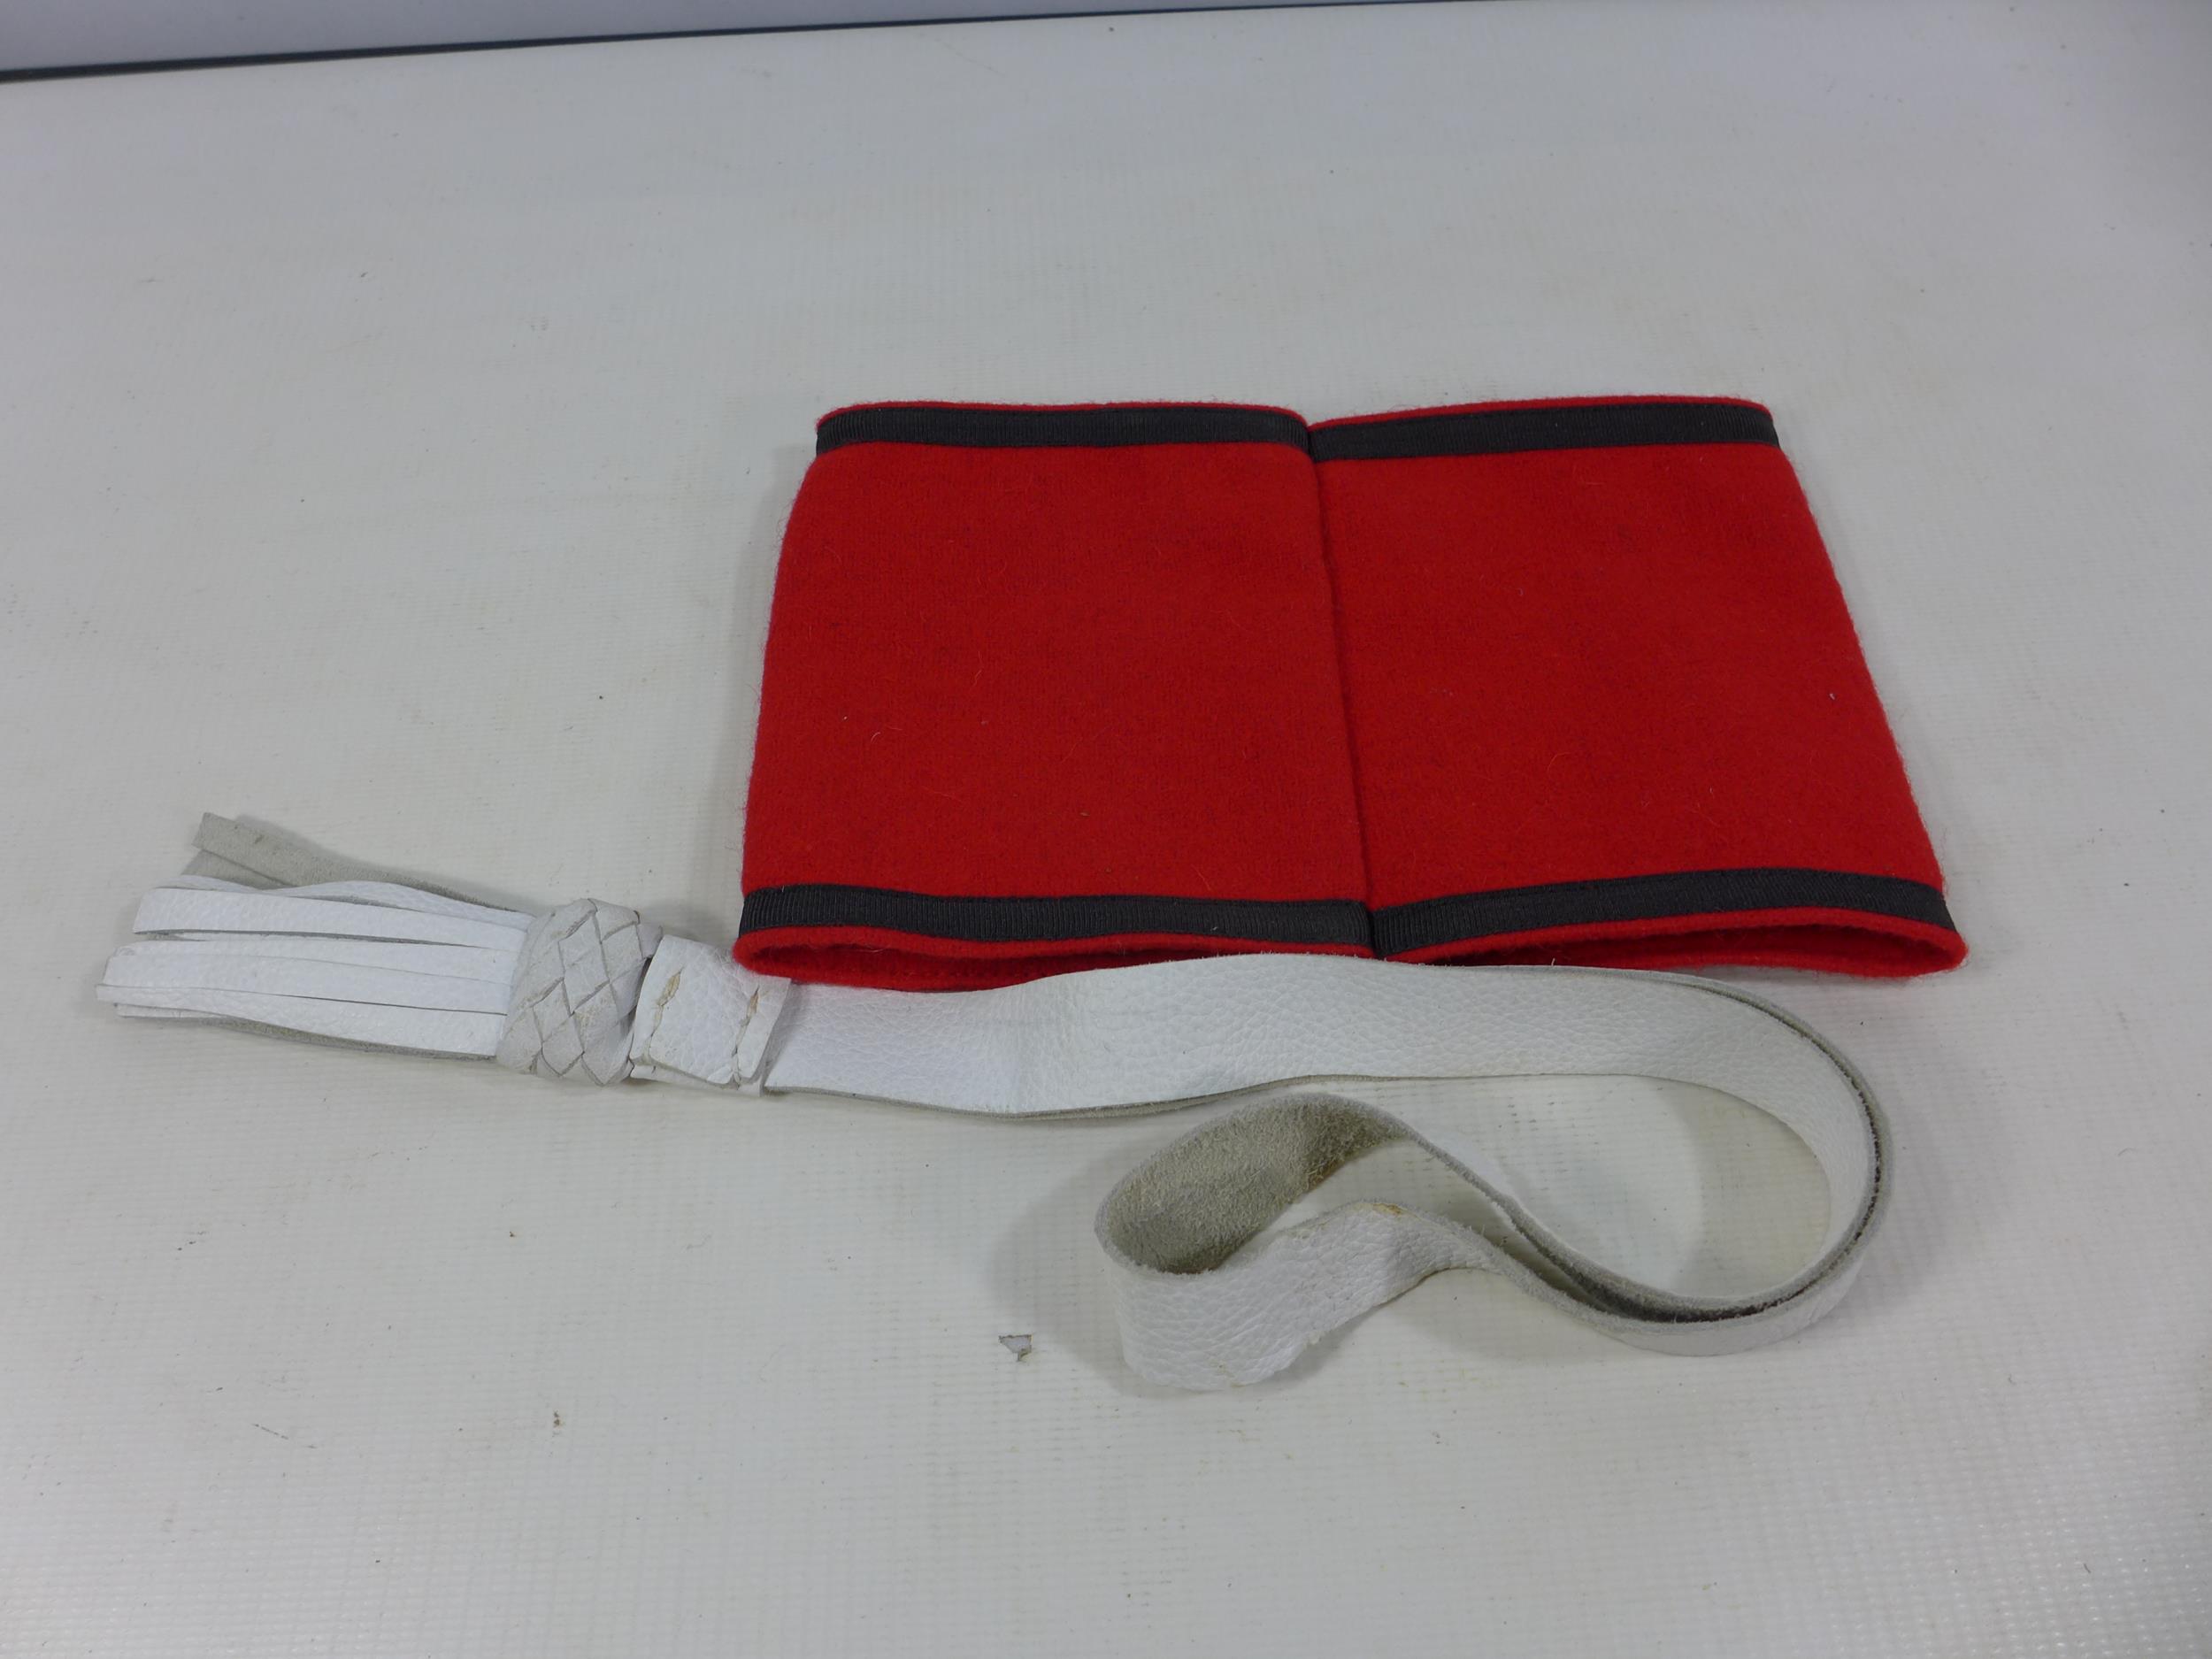 A NAZI ARM BAND AND A WHITE LEATHER TASSLE (2) - Image 2 of 3